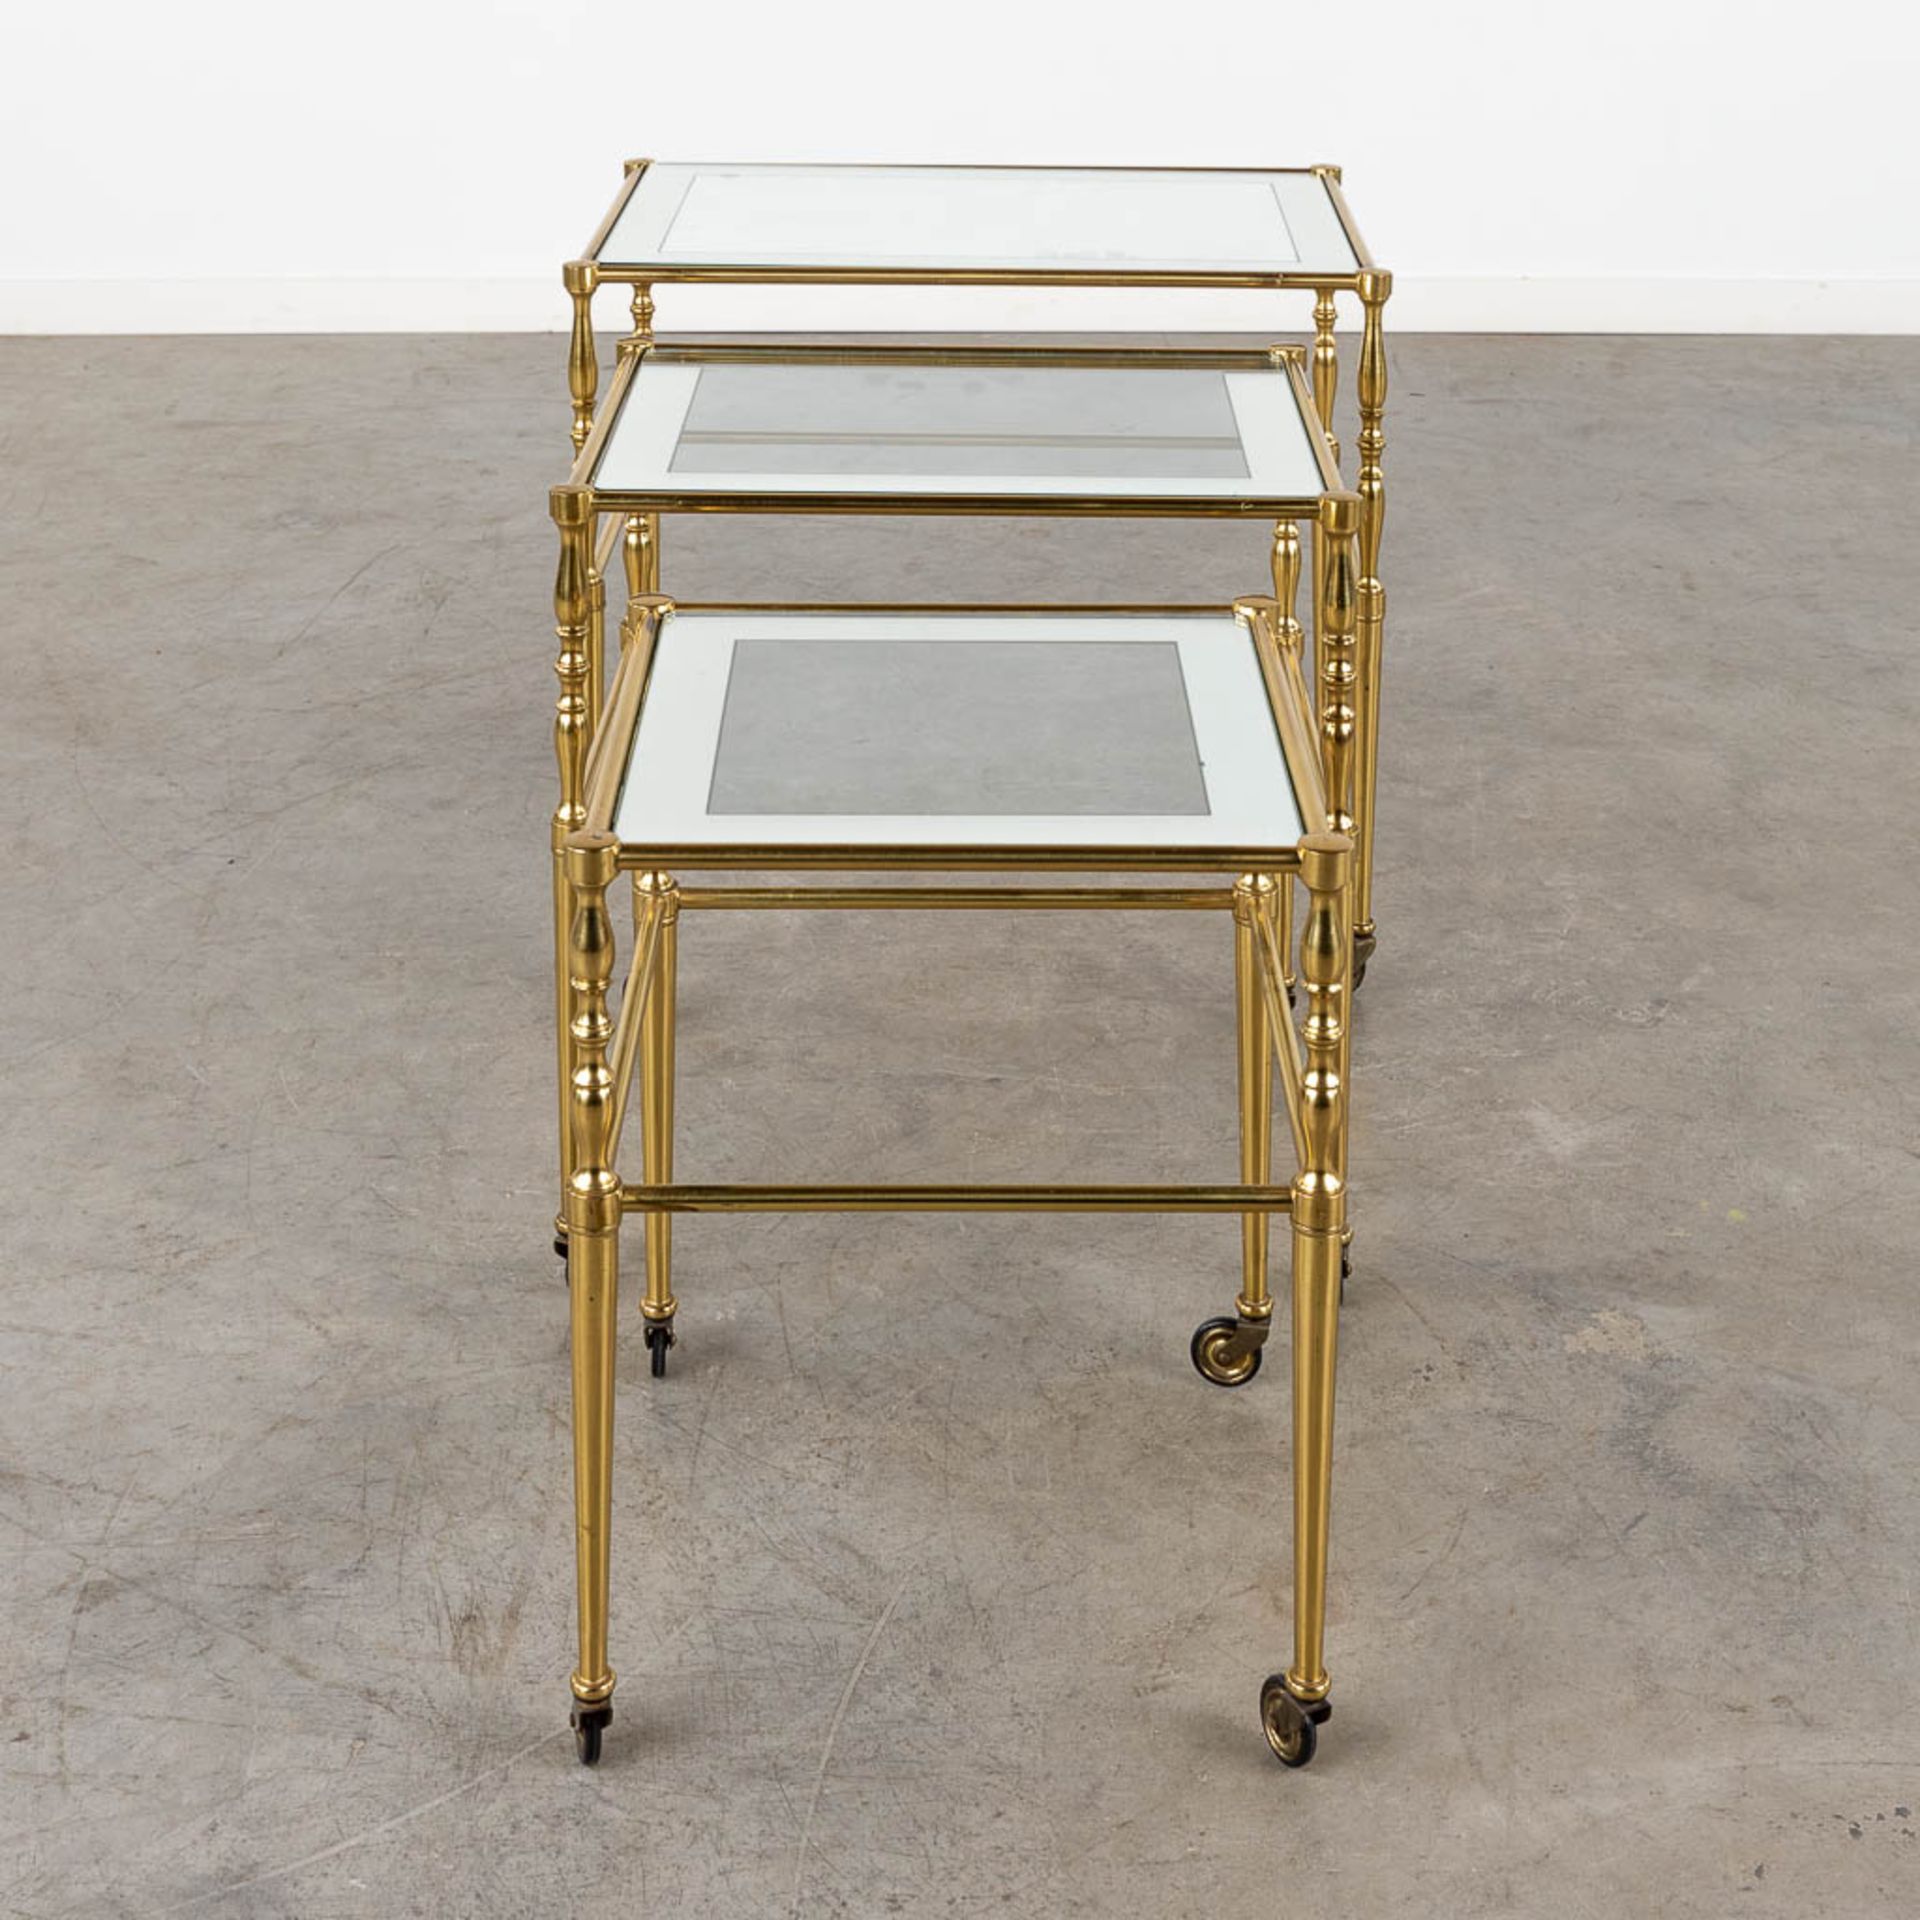 A set of nesting tables, brass and glass. 20th C. (D:39 x W:56 x H:52 cm) - Image 3 of 11